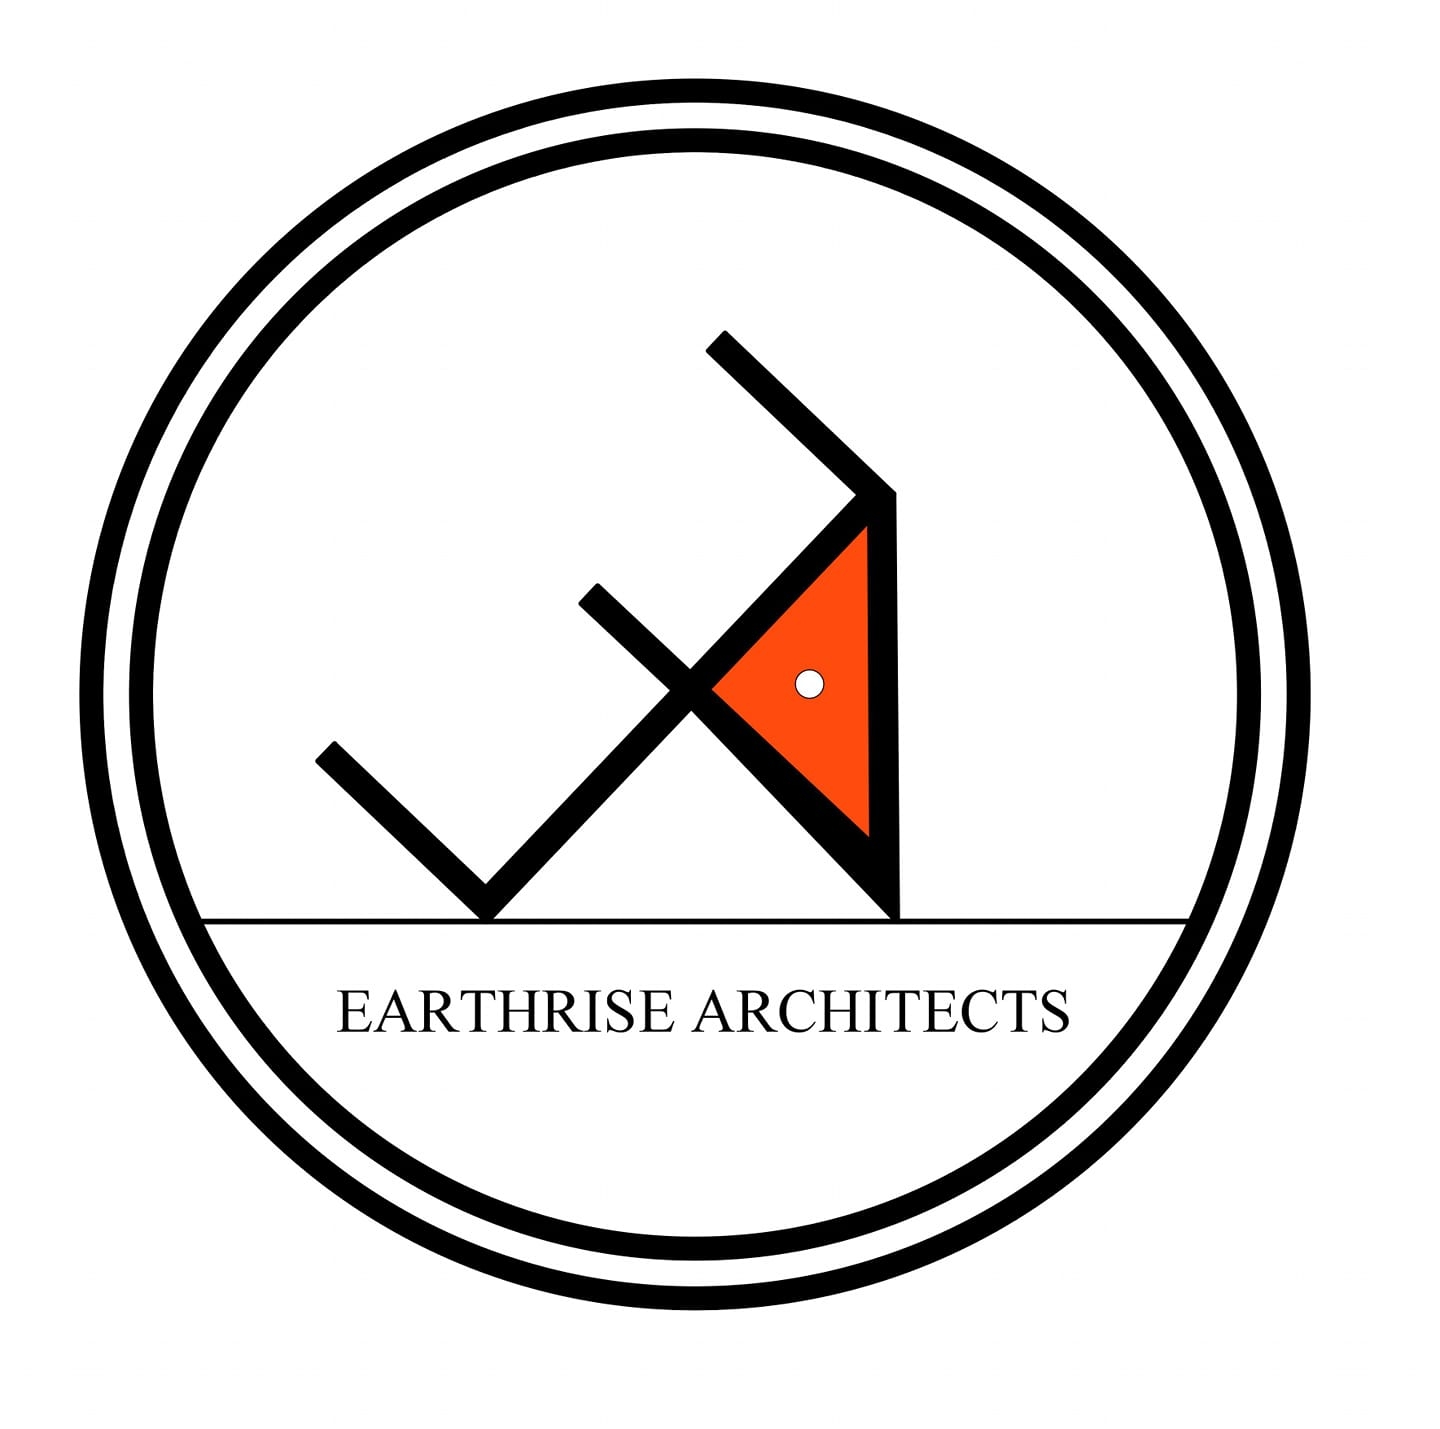 Earthrise Architects|Legal Services|Professional Services